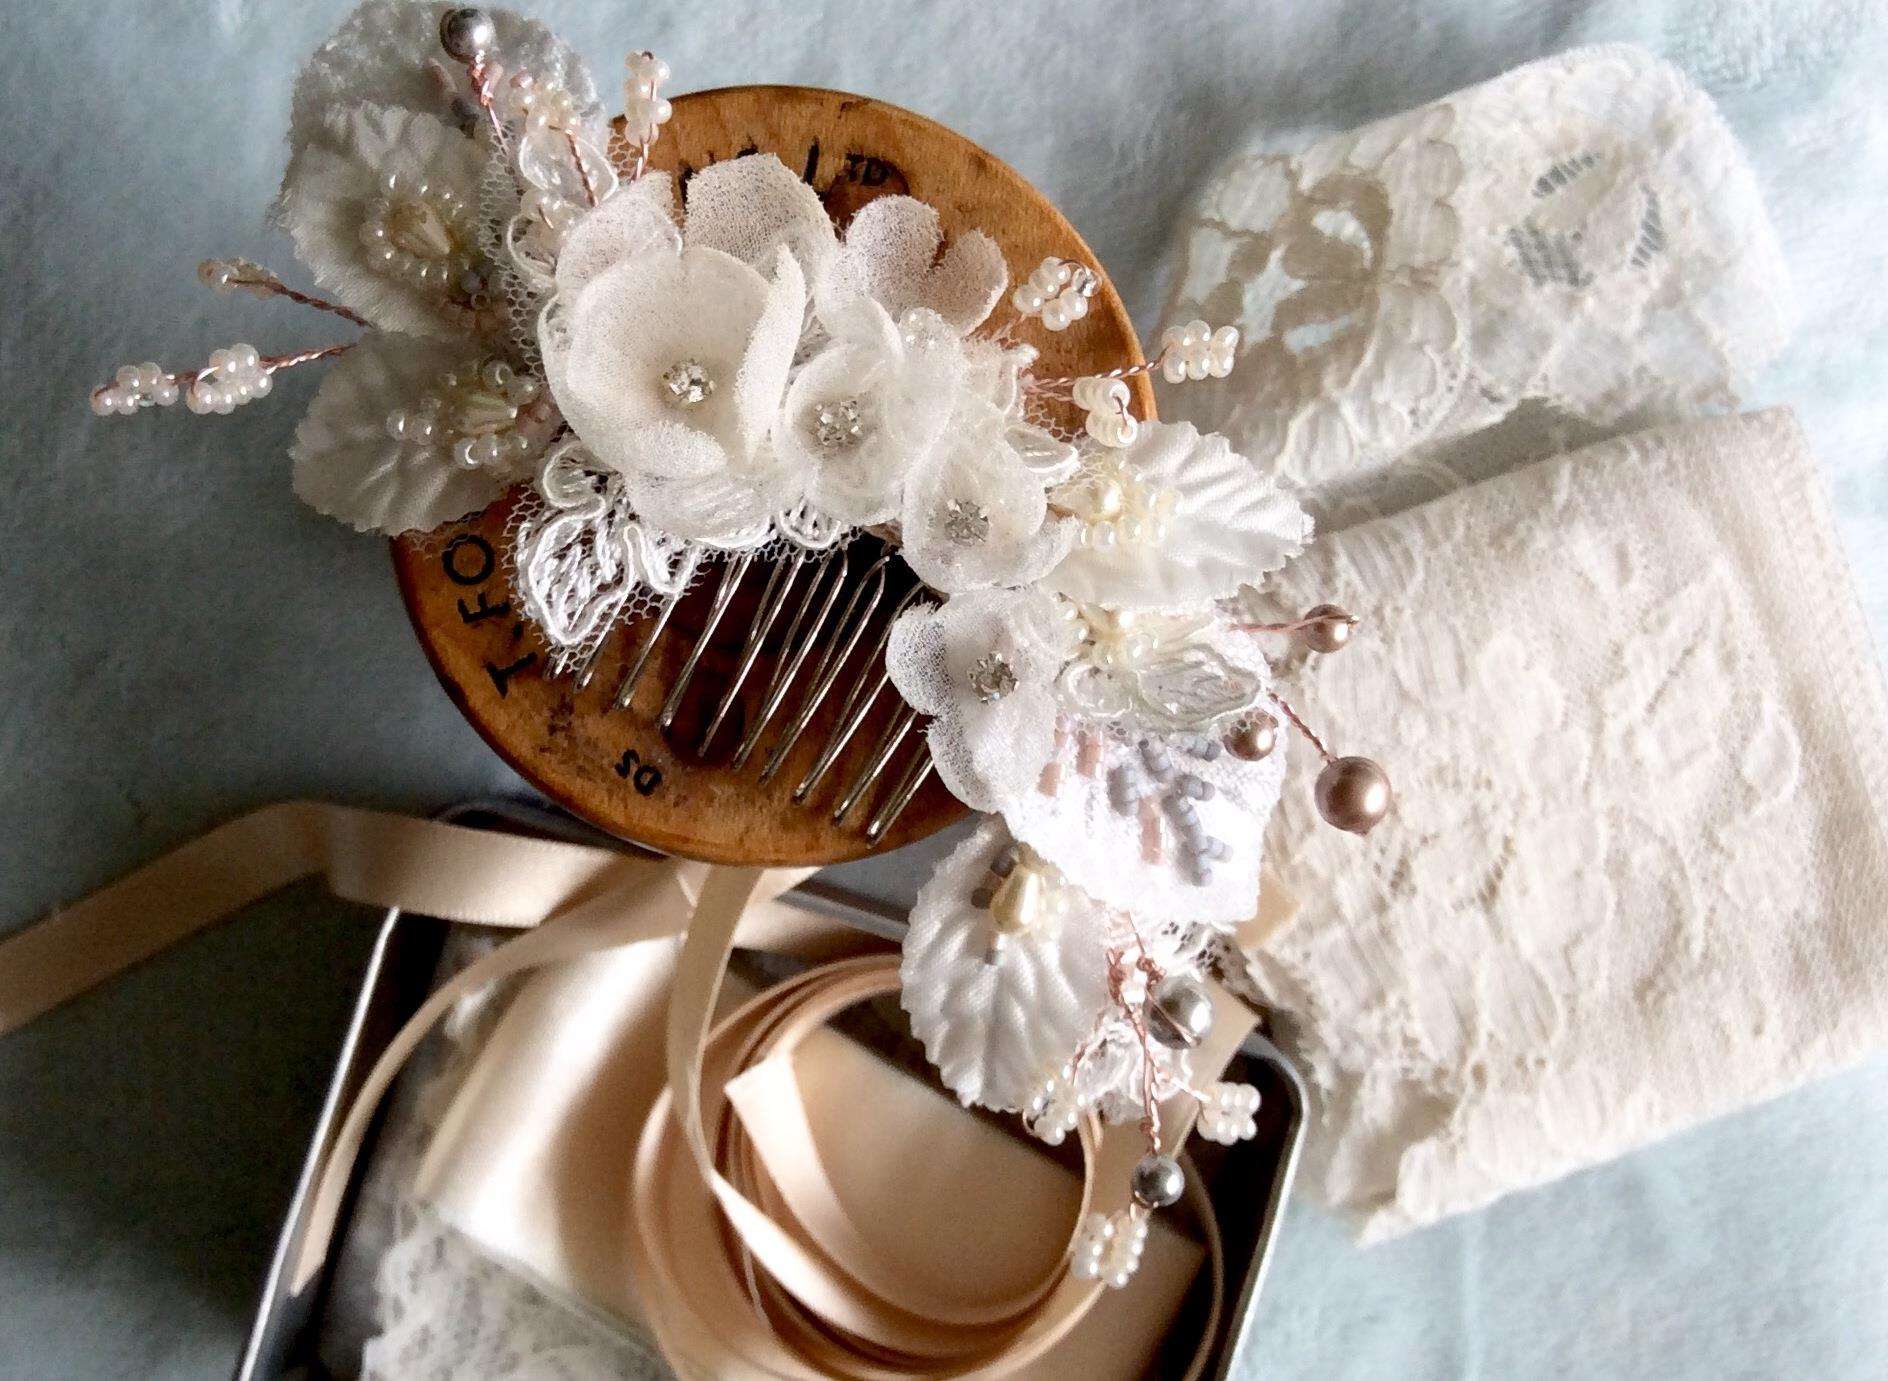 The Vintage Bobbin Bridal's pieces are hand crafted